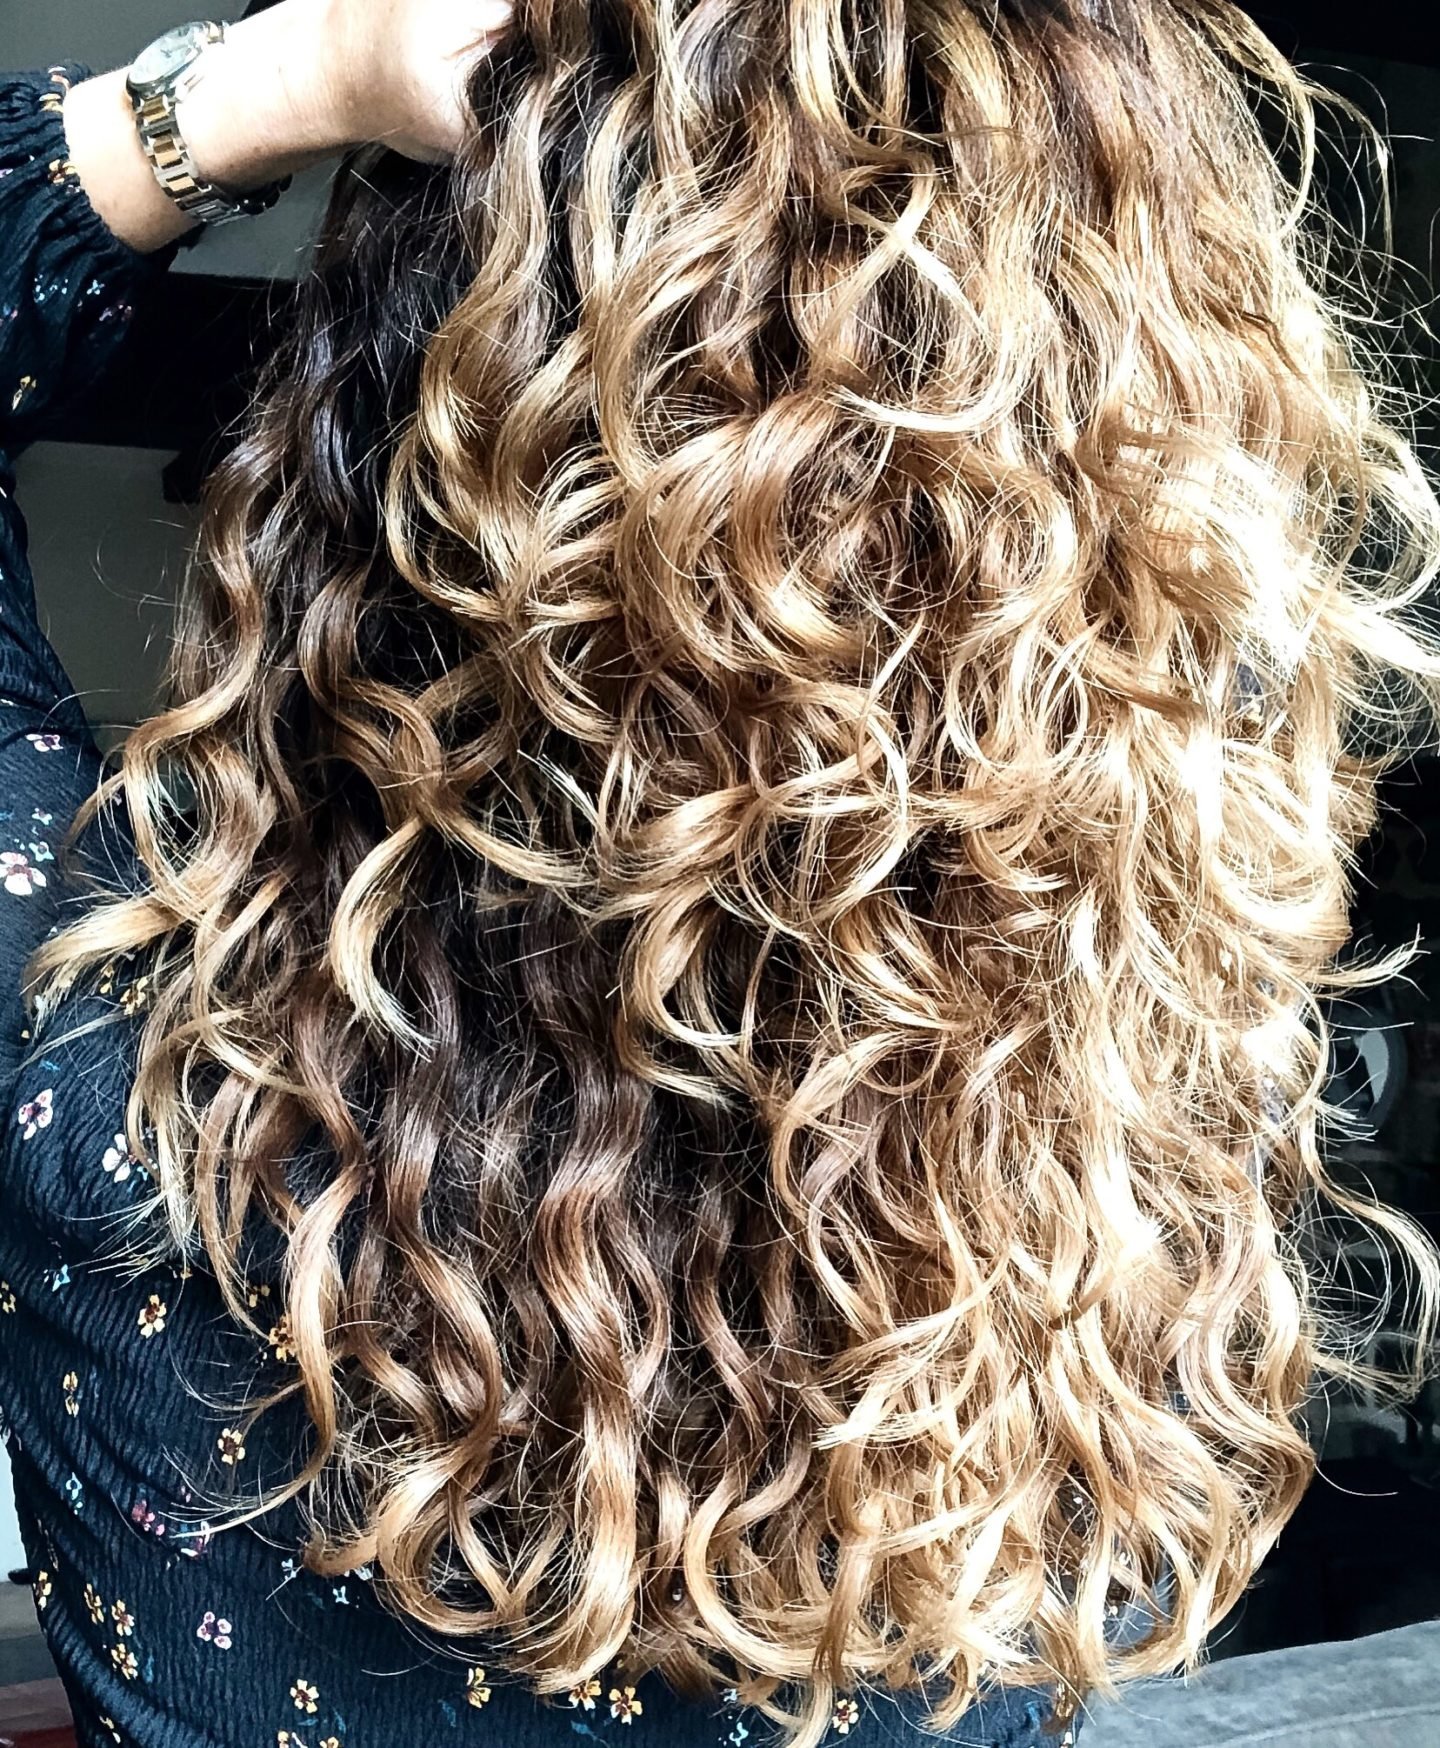 How to style curly hair without heat ( 25 ways ) - Like Love Do